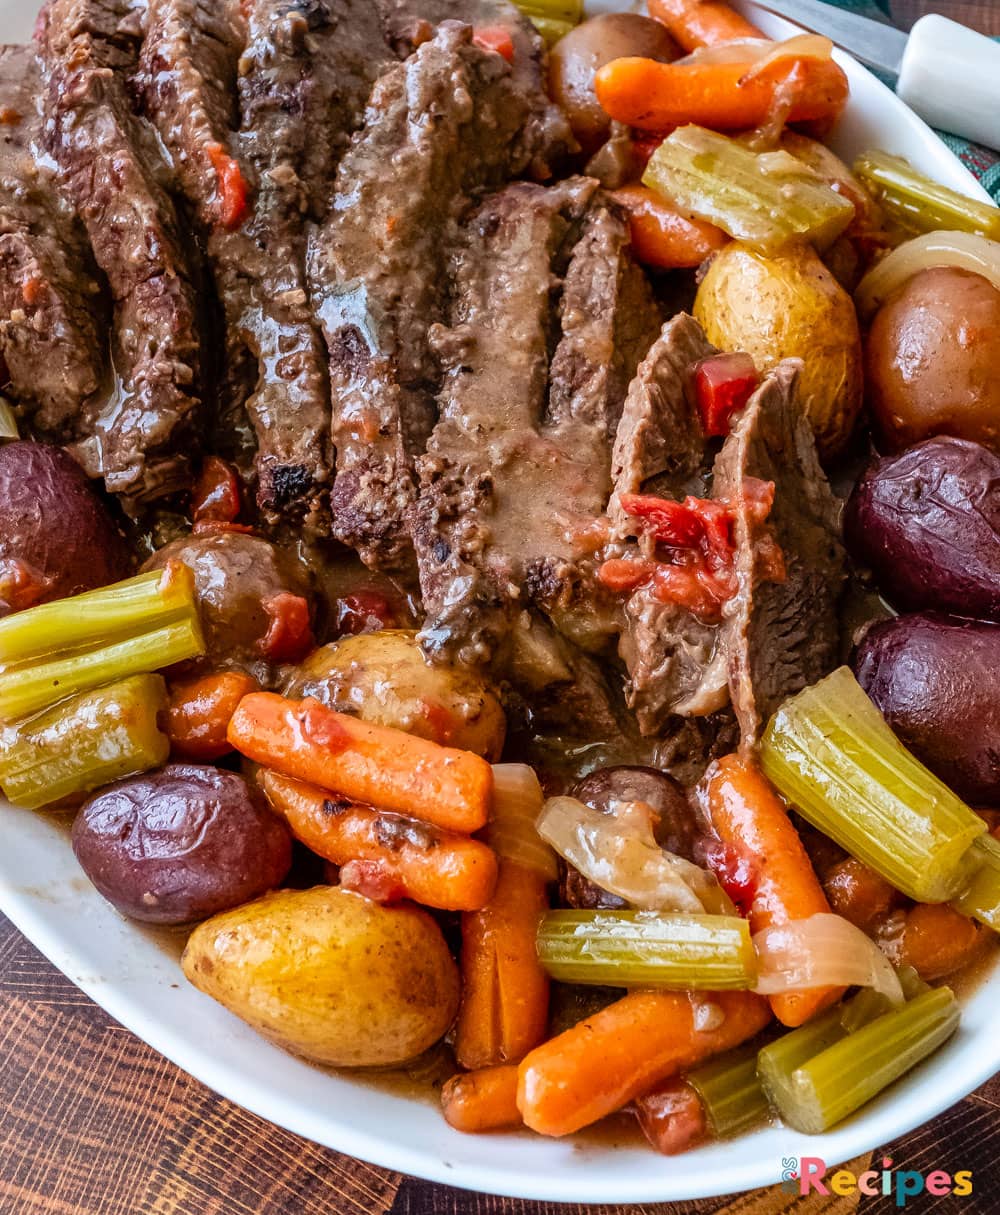 Easy Beef Shoulder Roast With Vegetables - Recipes